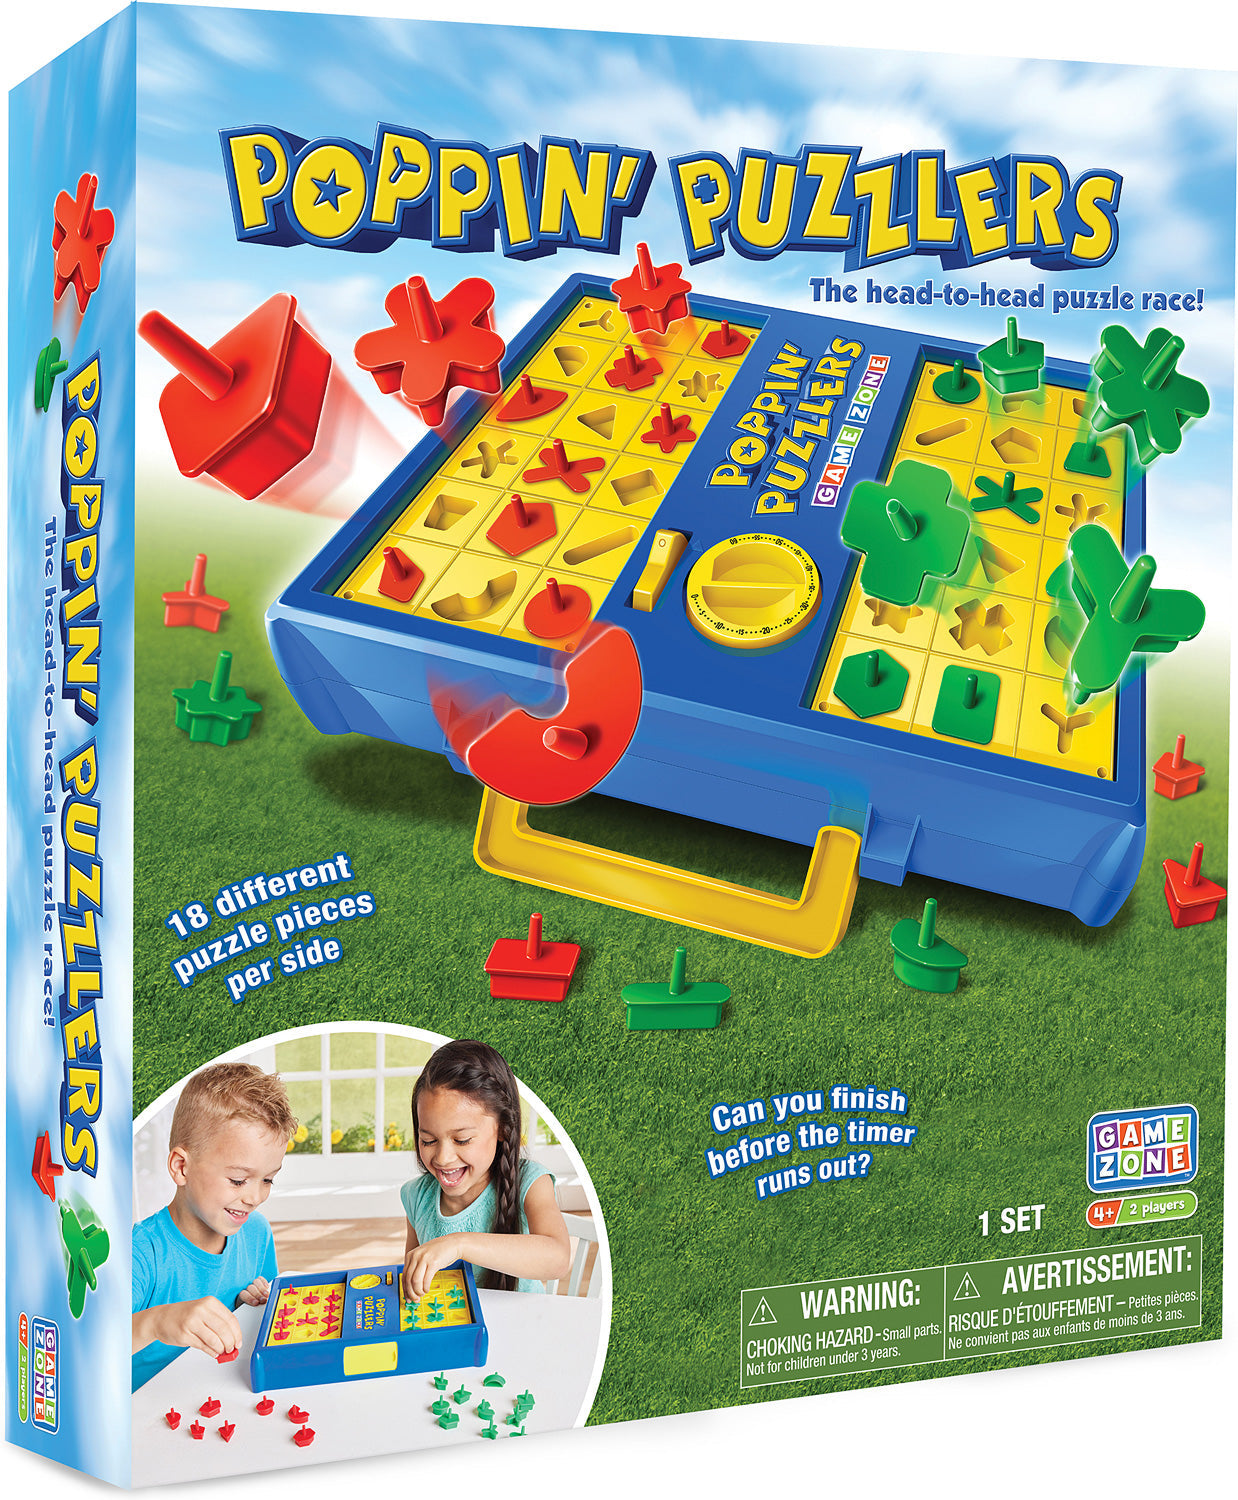 Poppin Puzzlers